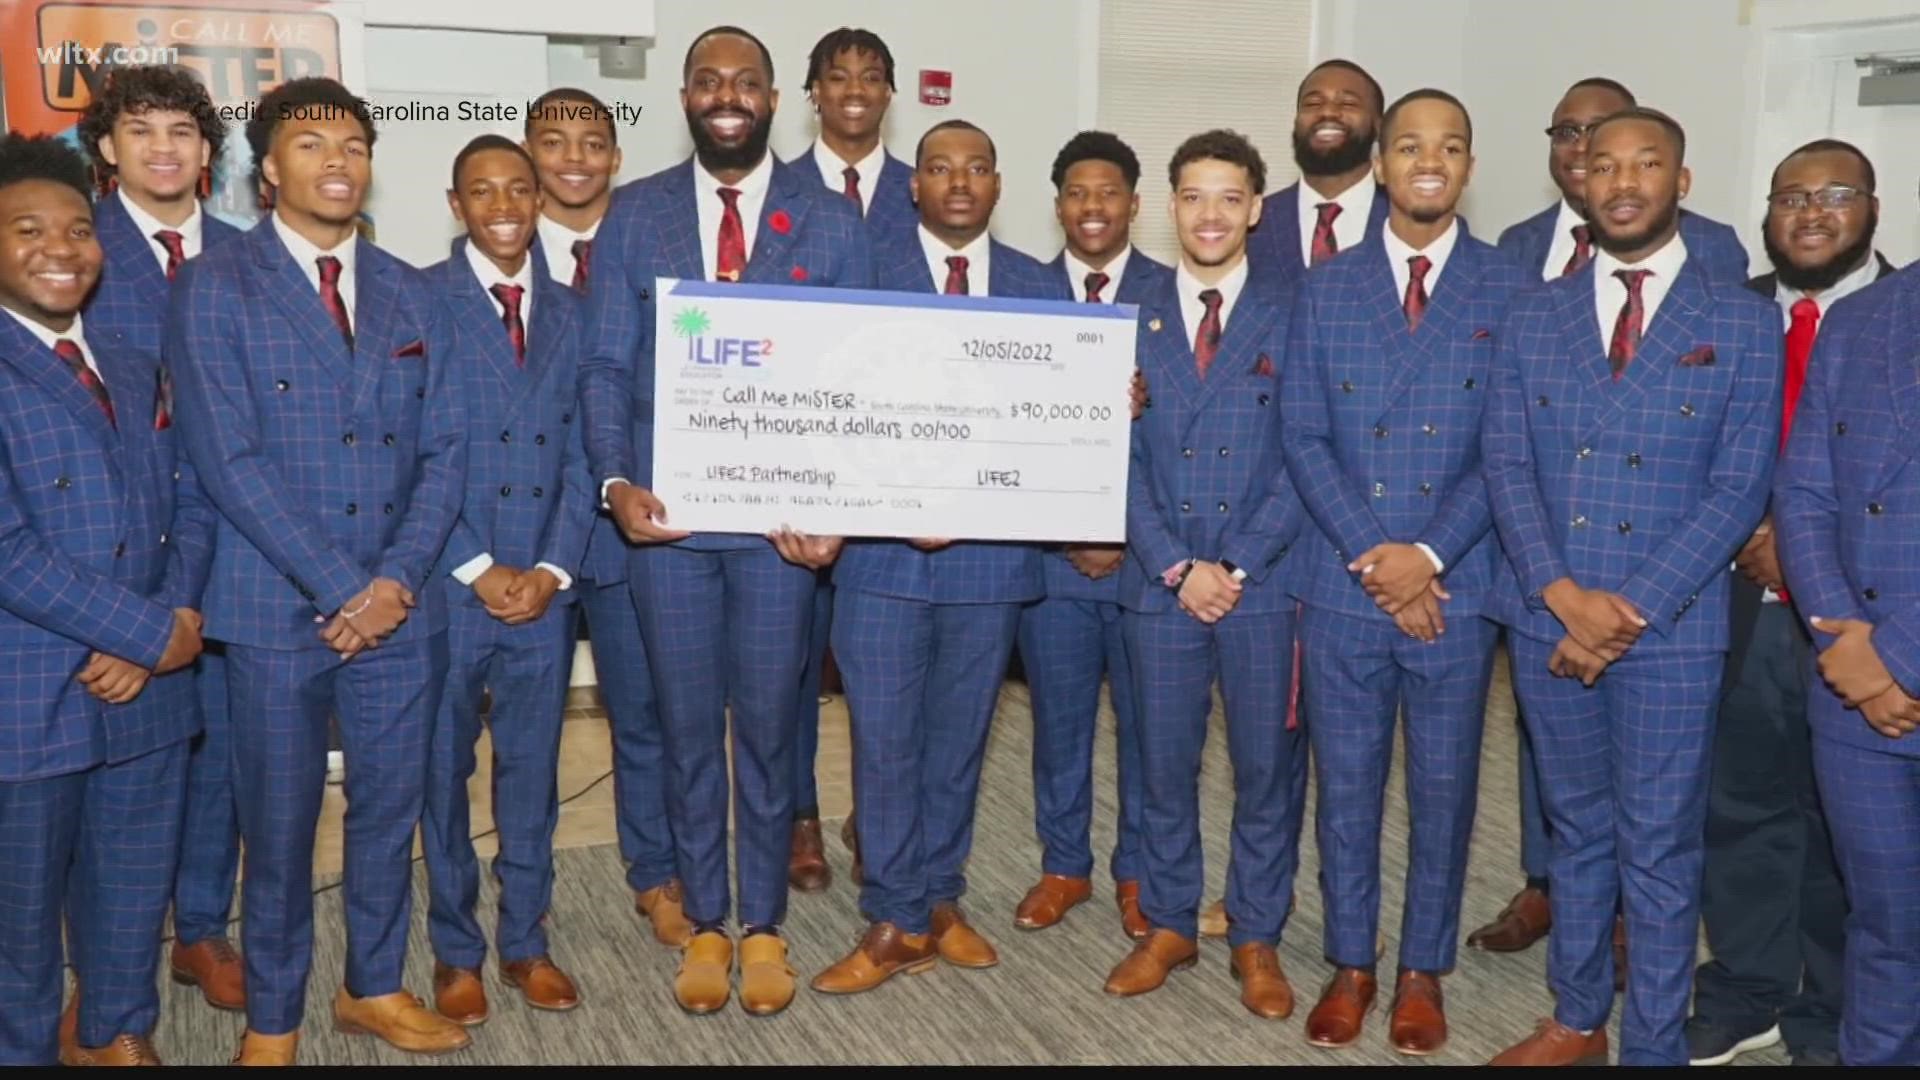 The program helps to embower the next generation of Black male teachers, the school was awarded $90K for the program.